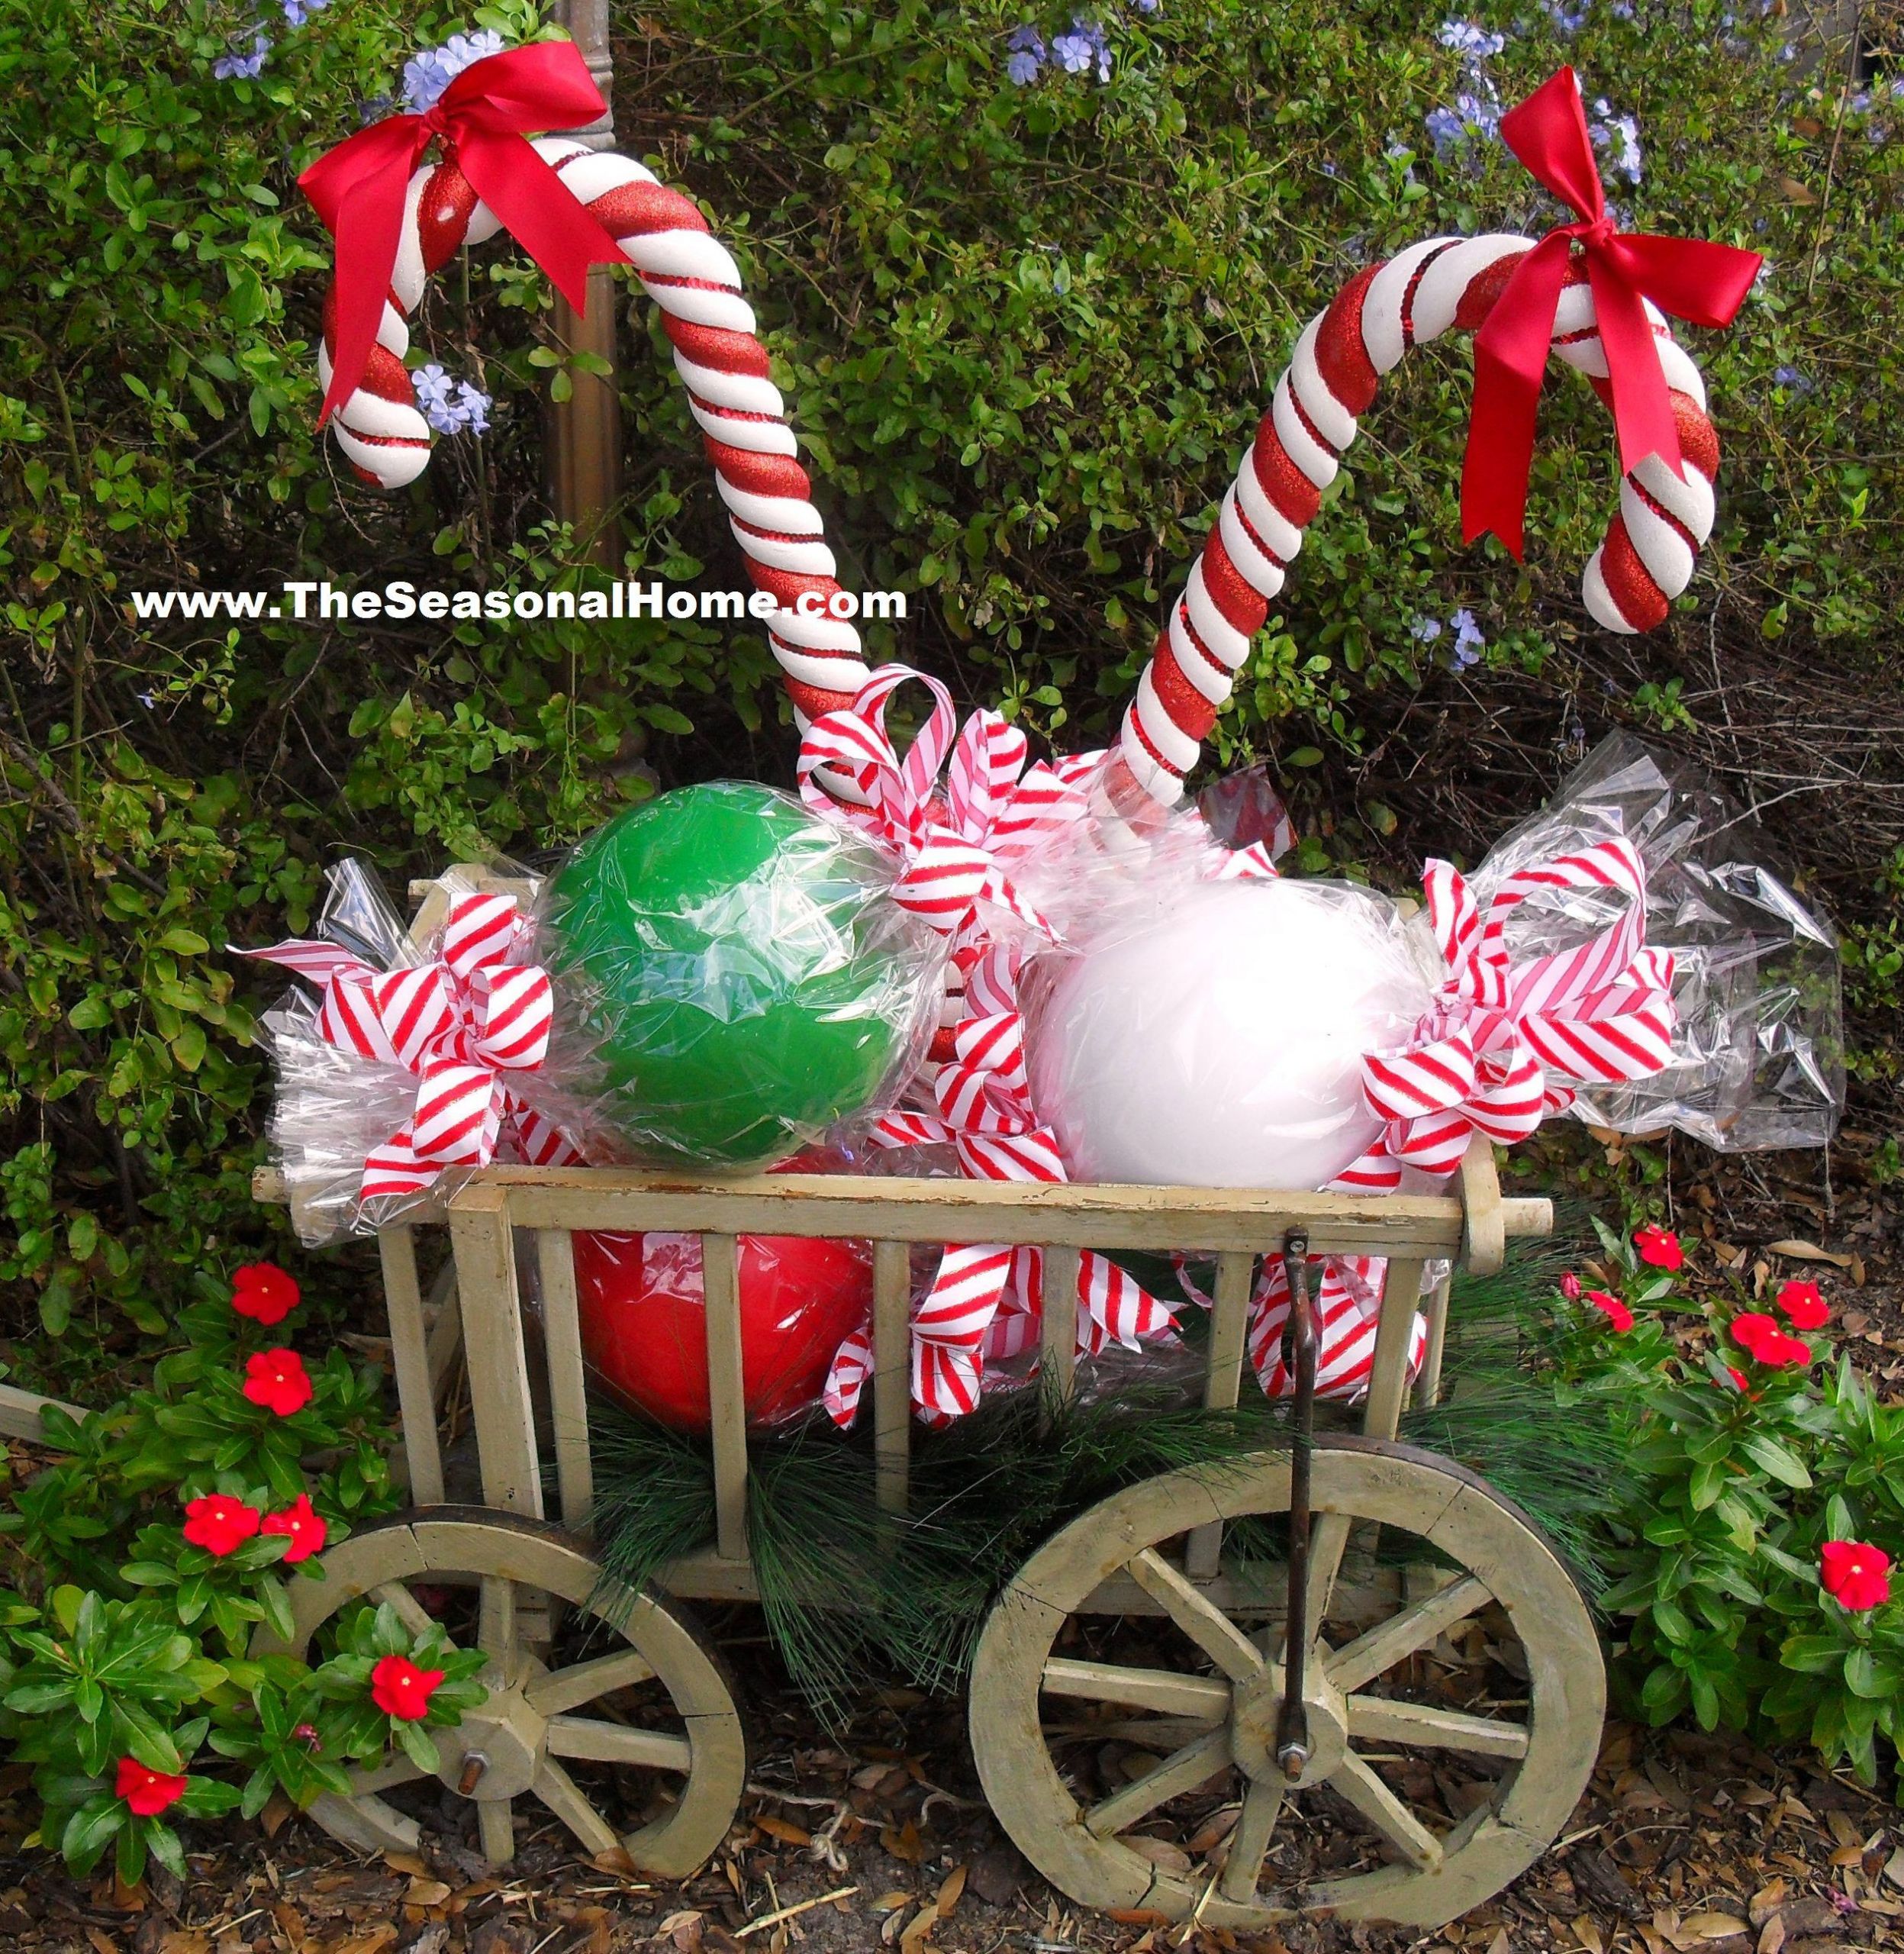 DIY Outdoor Christmas Candy Decorations
 HOW TO DIY Outdoor Candy on The Seasonal Home blog